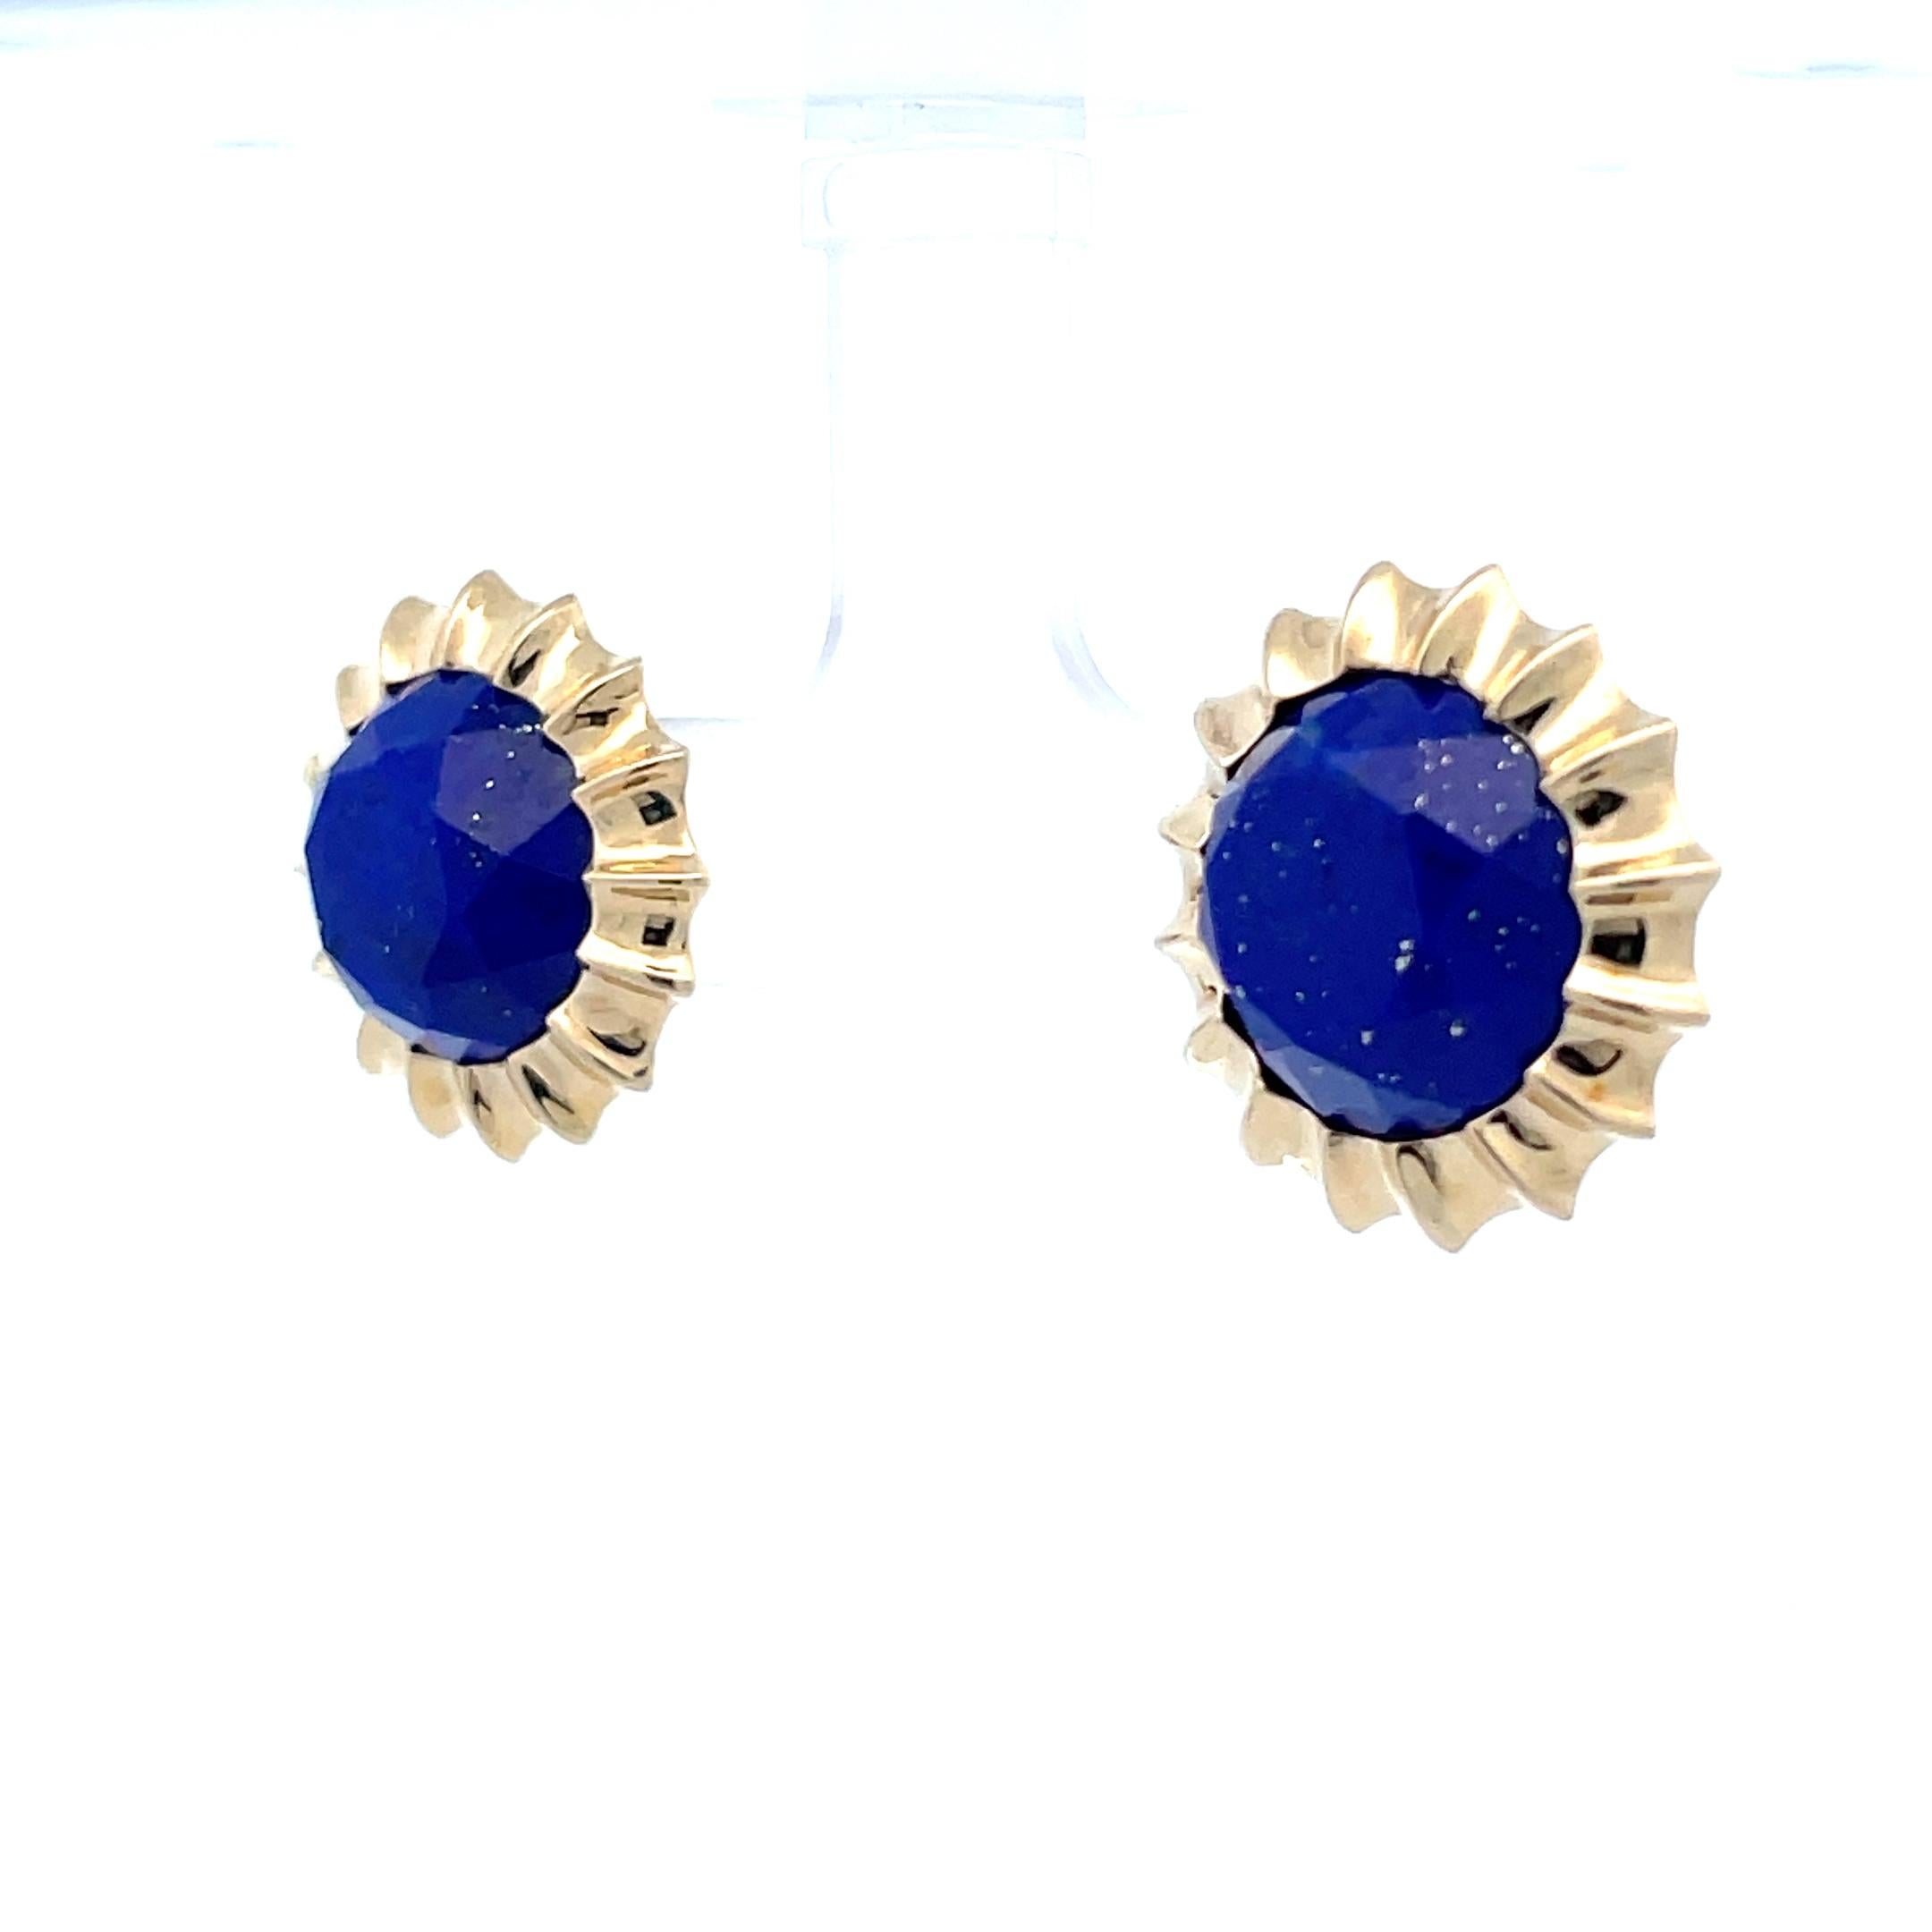 - 14k Yellow Gold 
- 4.30 cttw Lapis 
- 5.62 Grams 

This is a stunningly elegant pair of contemporary button stud earrings, made in 14k yellow gold, featuring kors lapis lazuli. These earrings contain 4.30 cttw of rich lazuli lapis that is encased